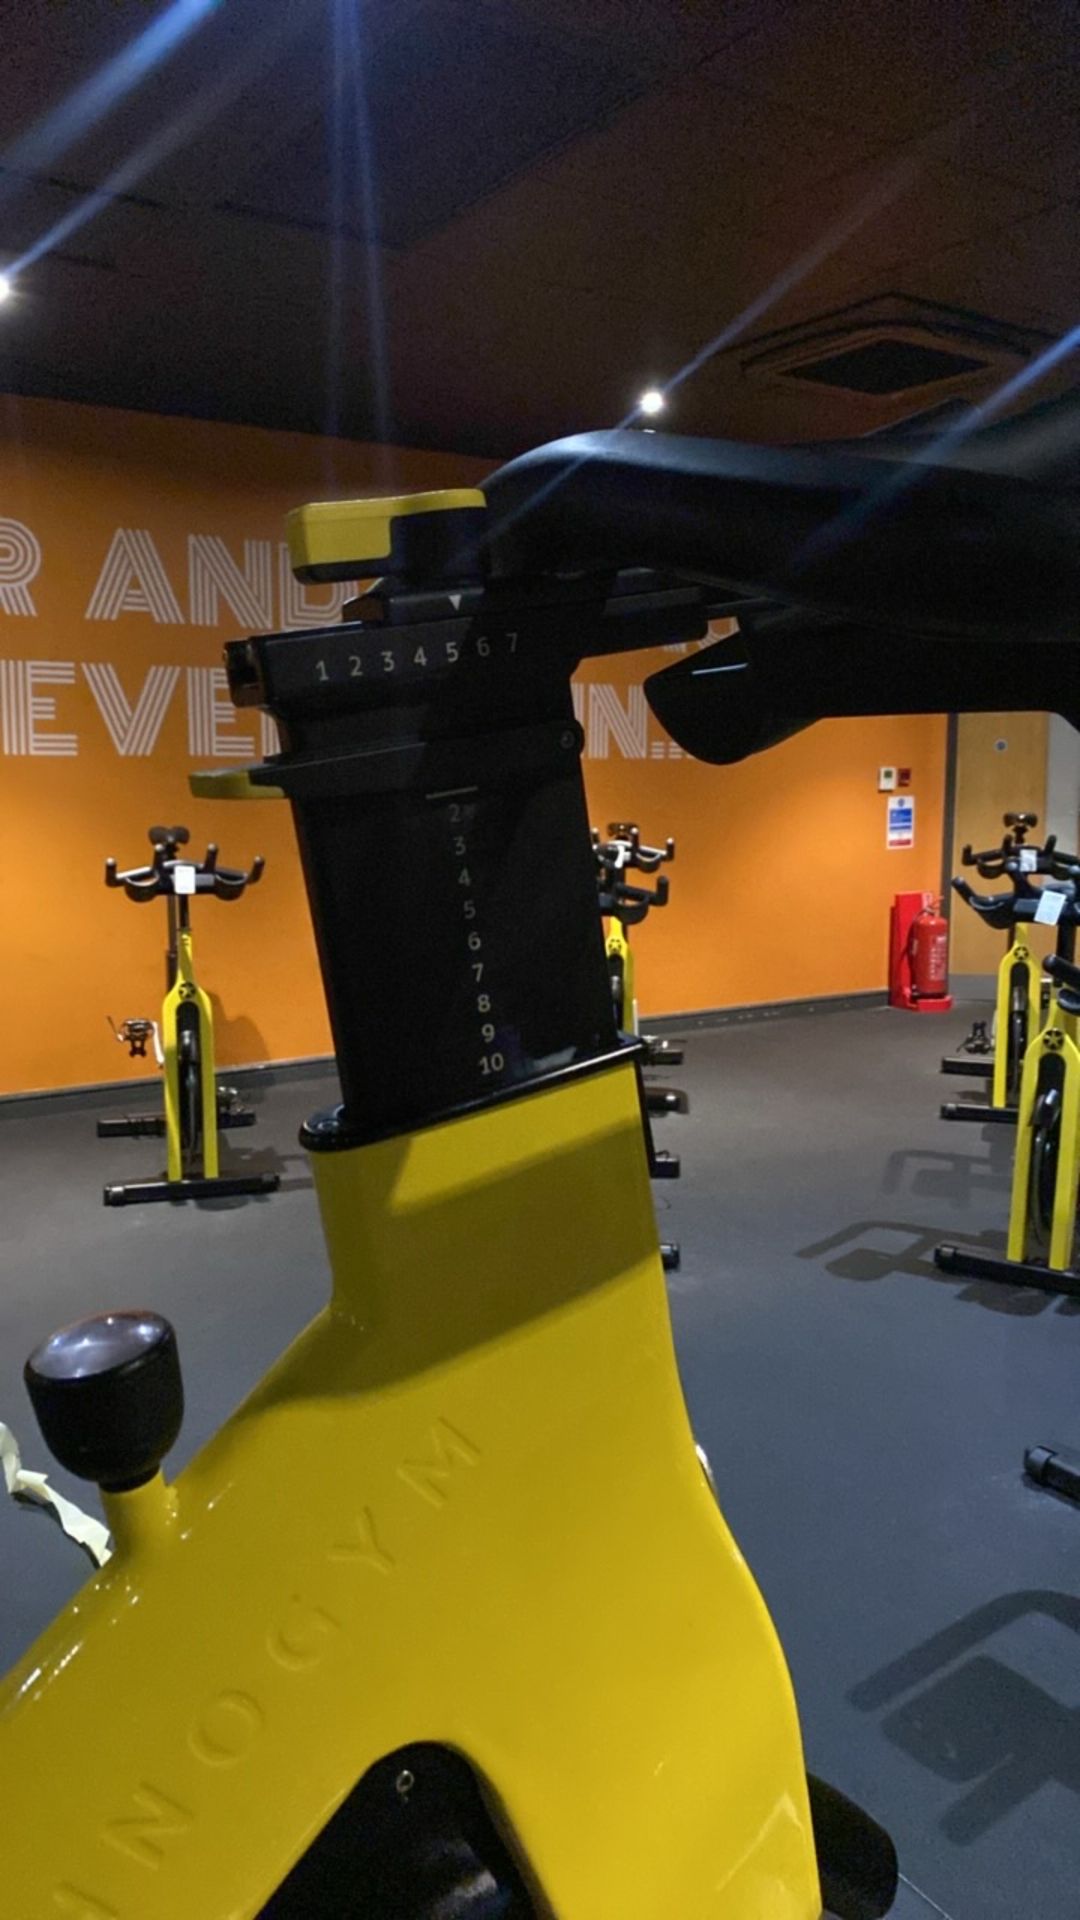 Technogym Group Cycle Ride Spin Bike - Image 5 of 8